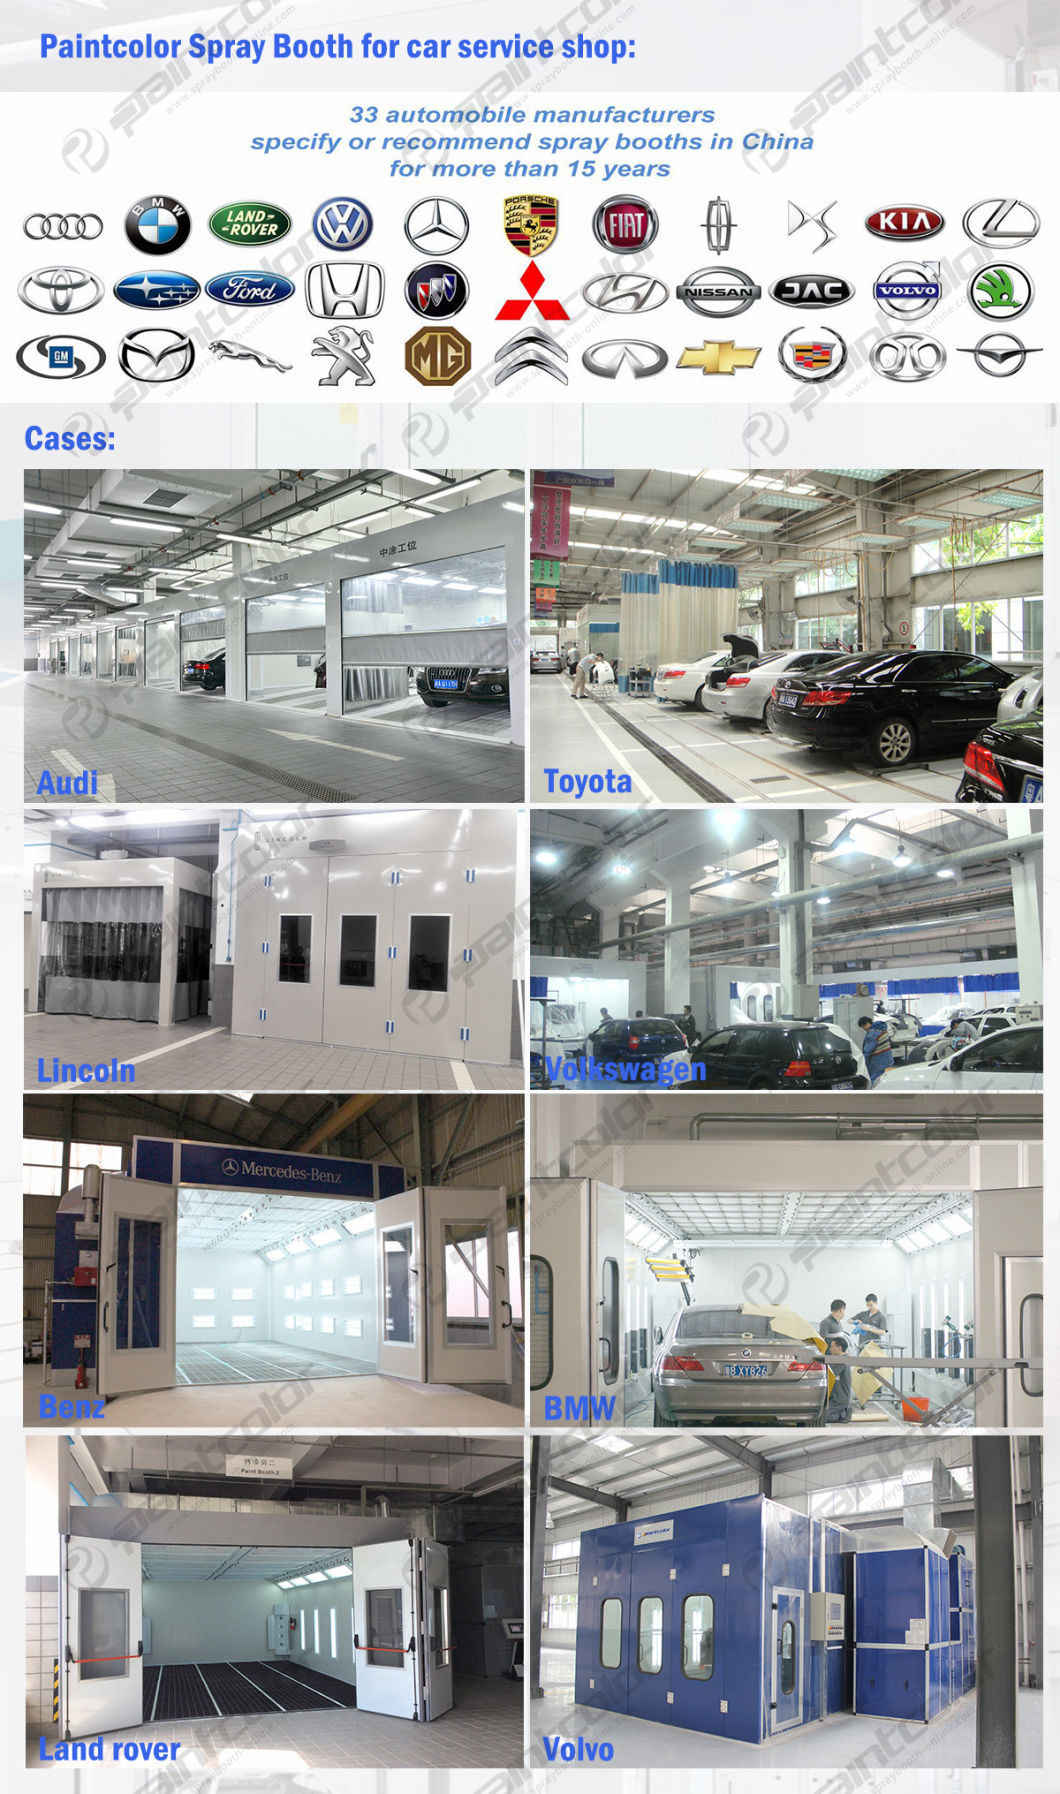 Sheet Metal Paint Line Multi-Booth Car Spray Paint Booth Production Line Paintcolor Brand